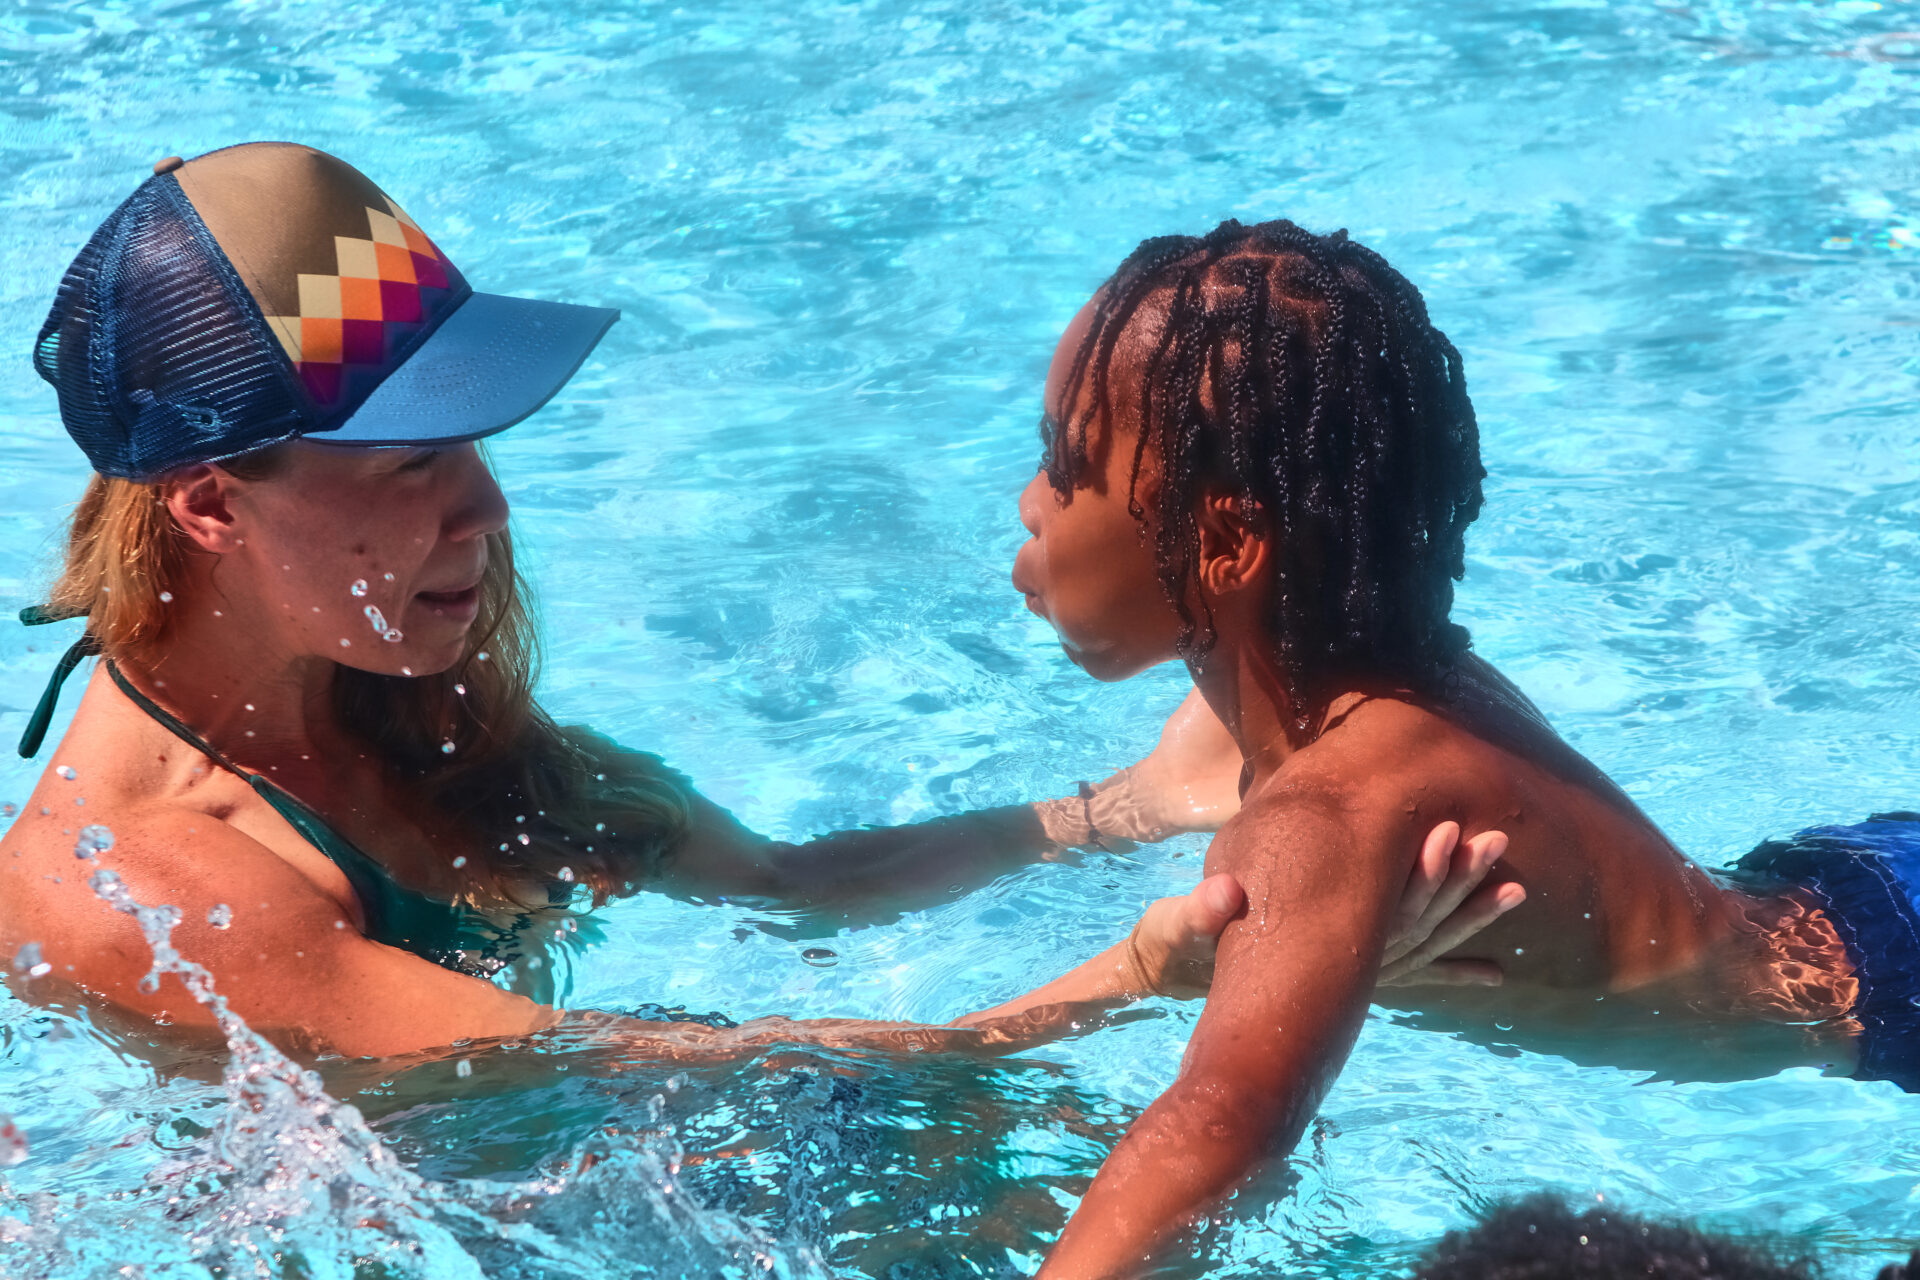 A woman with a blue baseball cap is helping a child swim in a pool. She appears to be showing him breathing techniques.